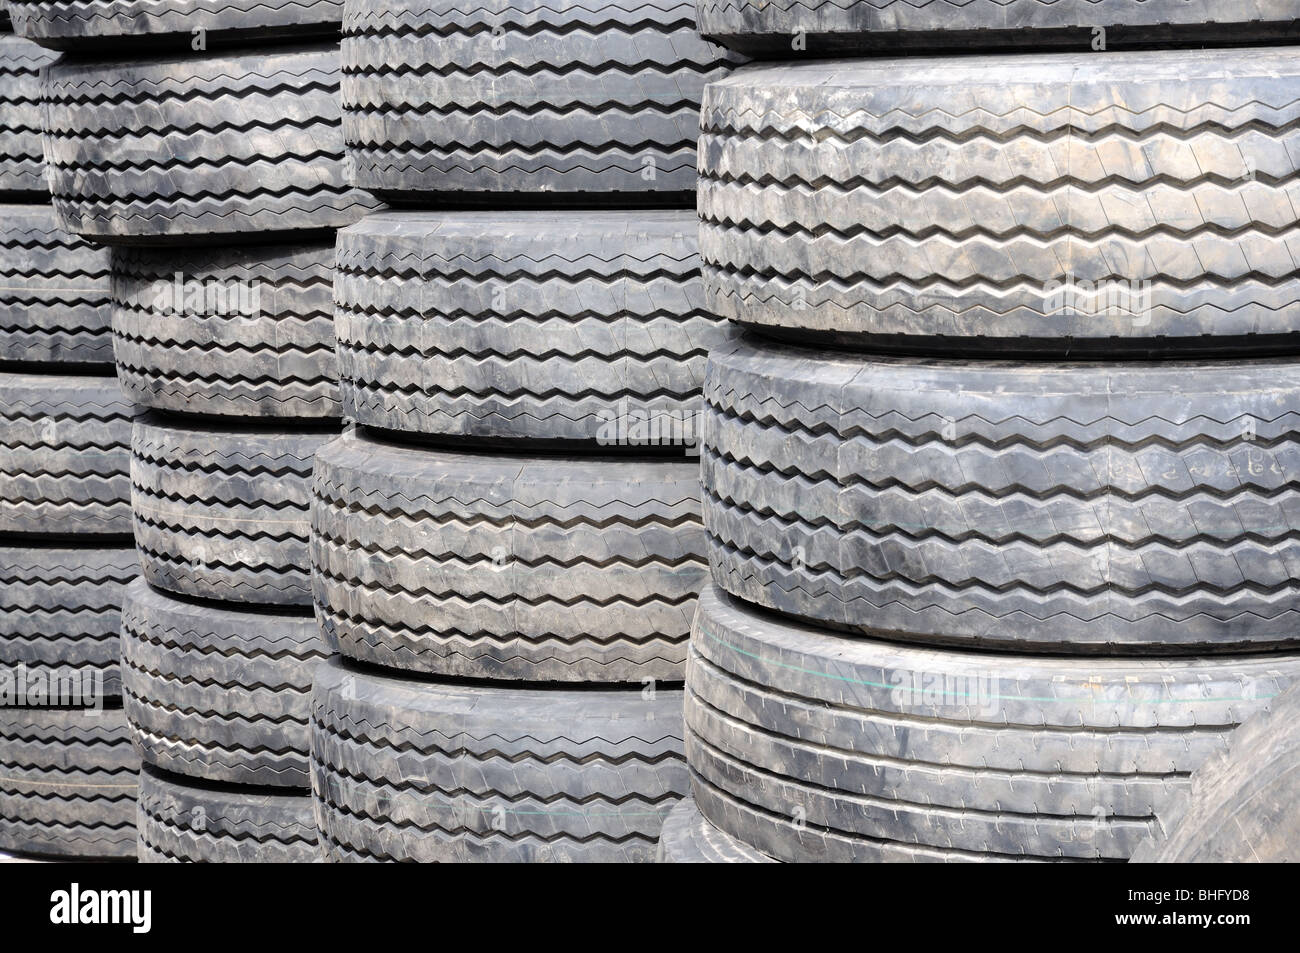 New Tires in Storage Stock Photo